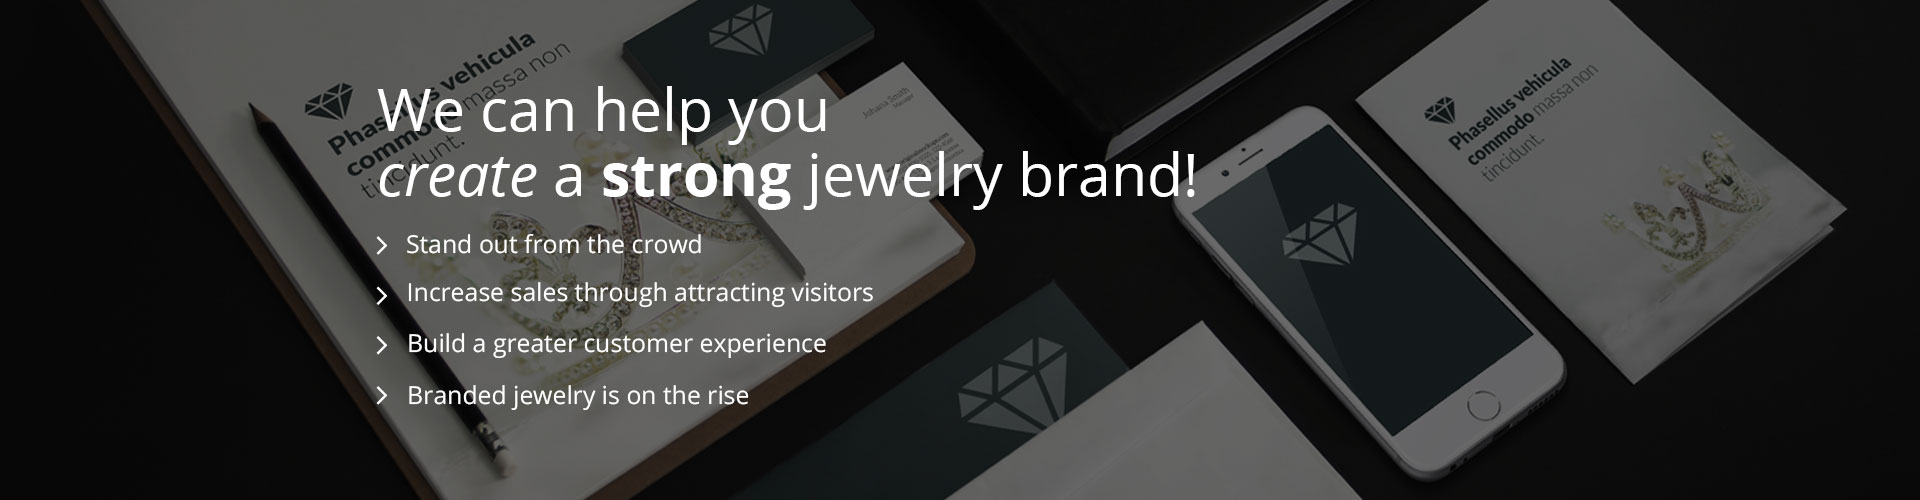 create a strong jewelry brand